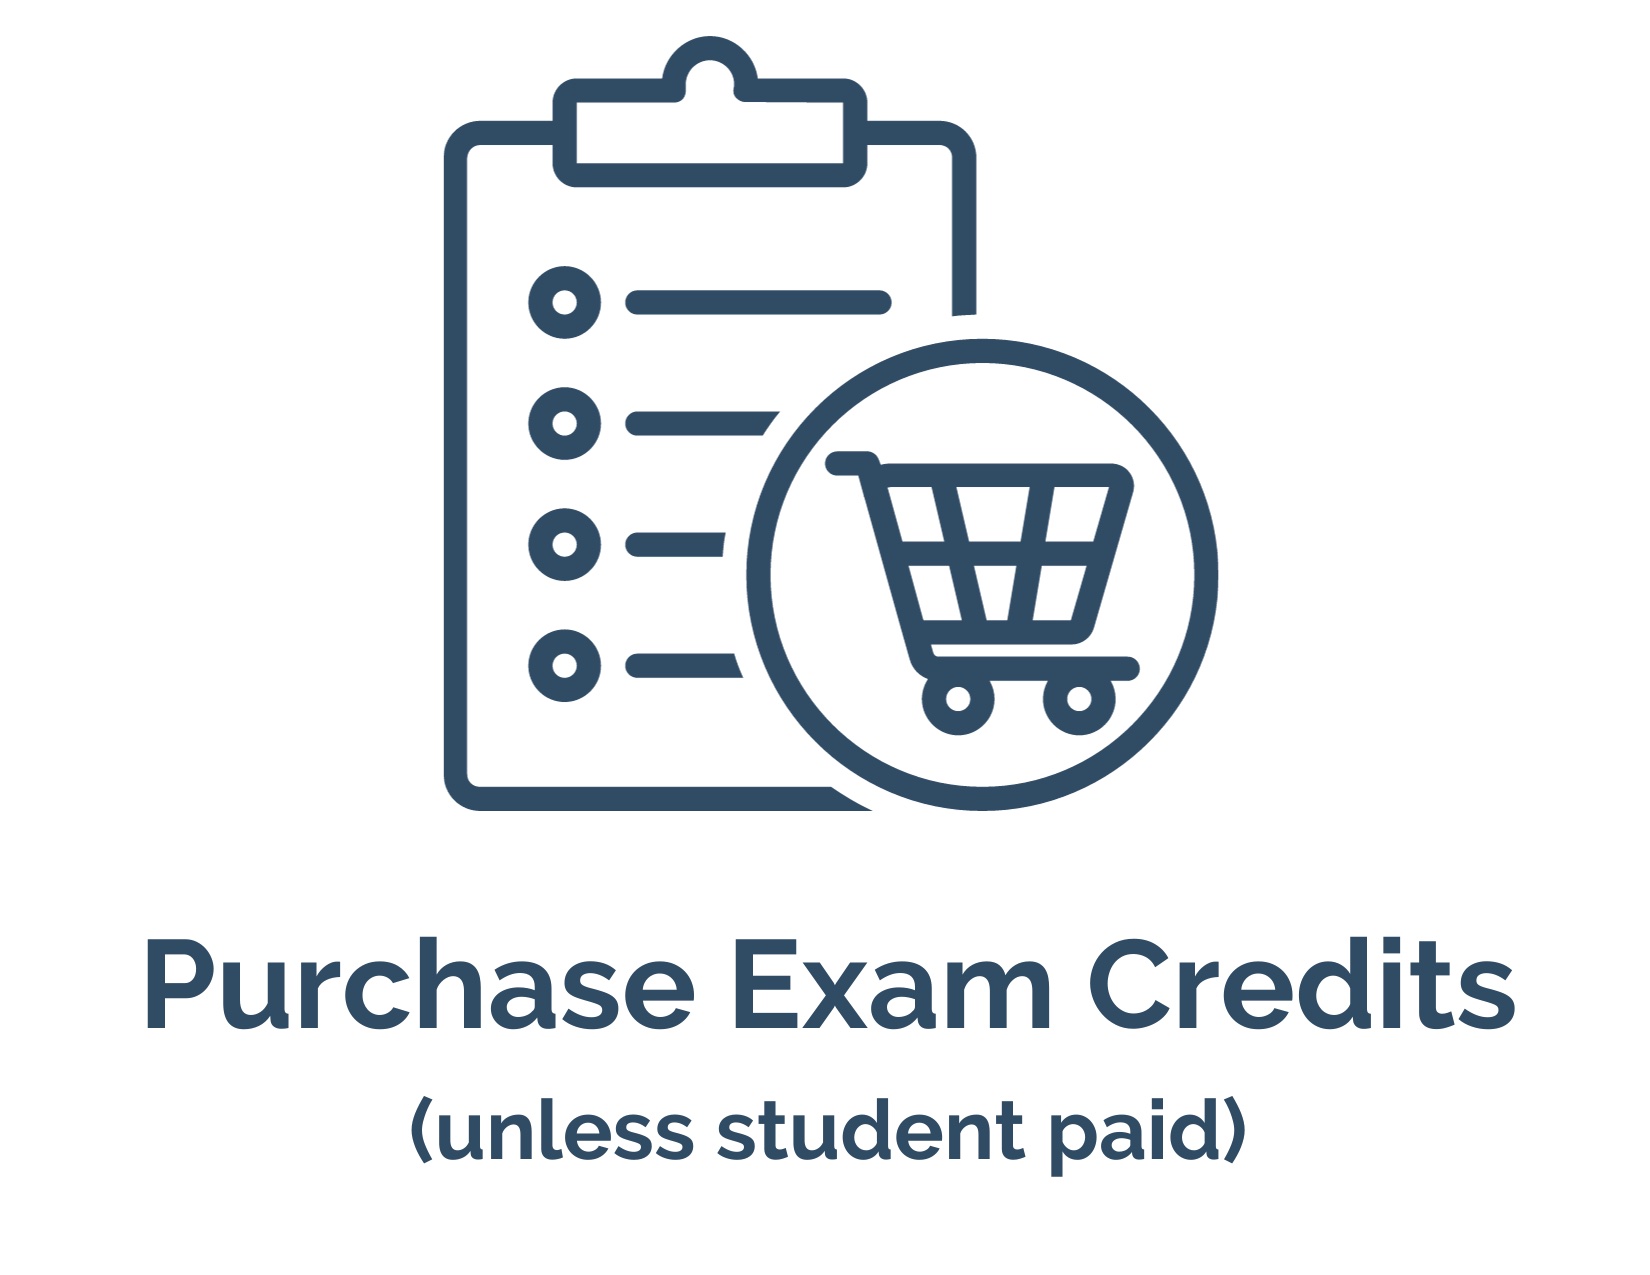 Administrator Guide Purchase Exam Credits (1)